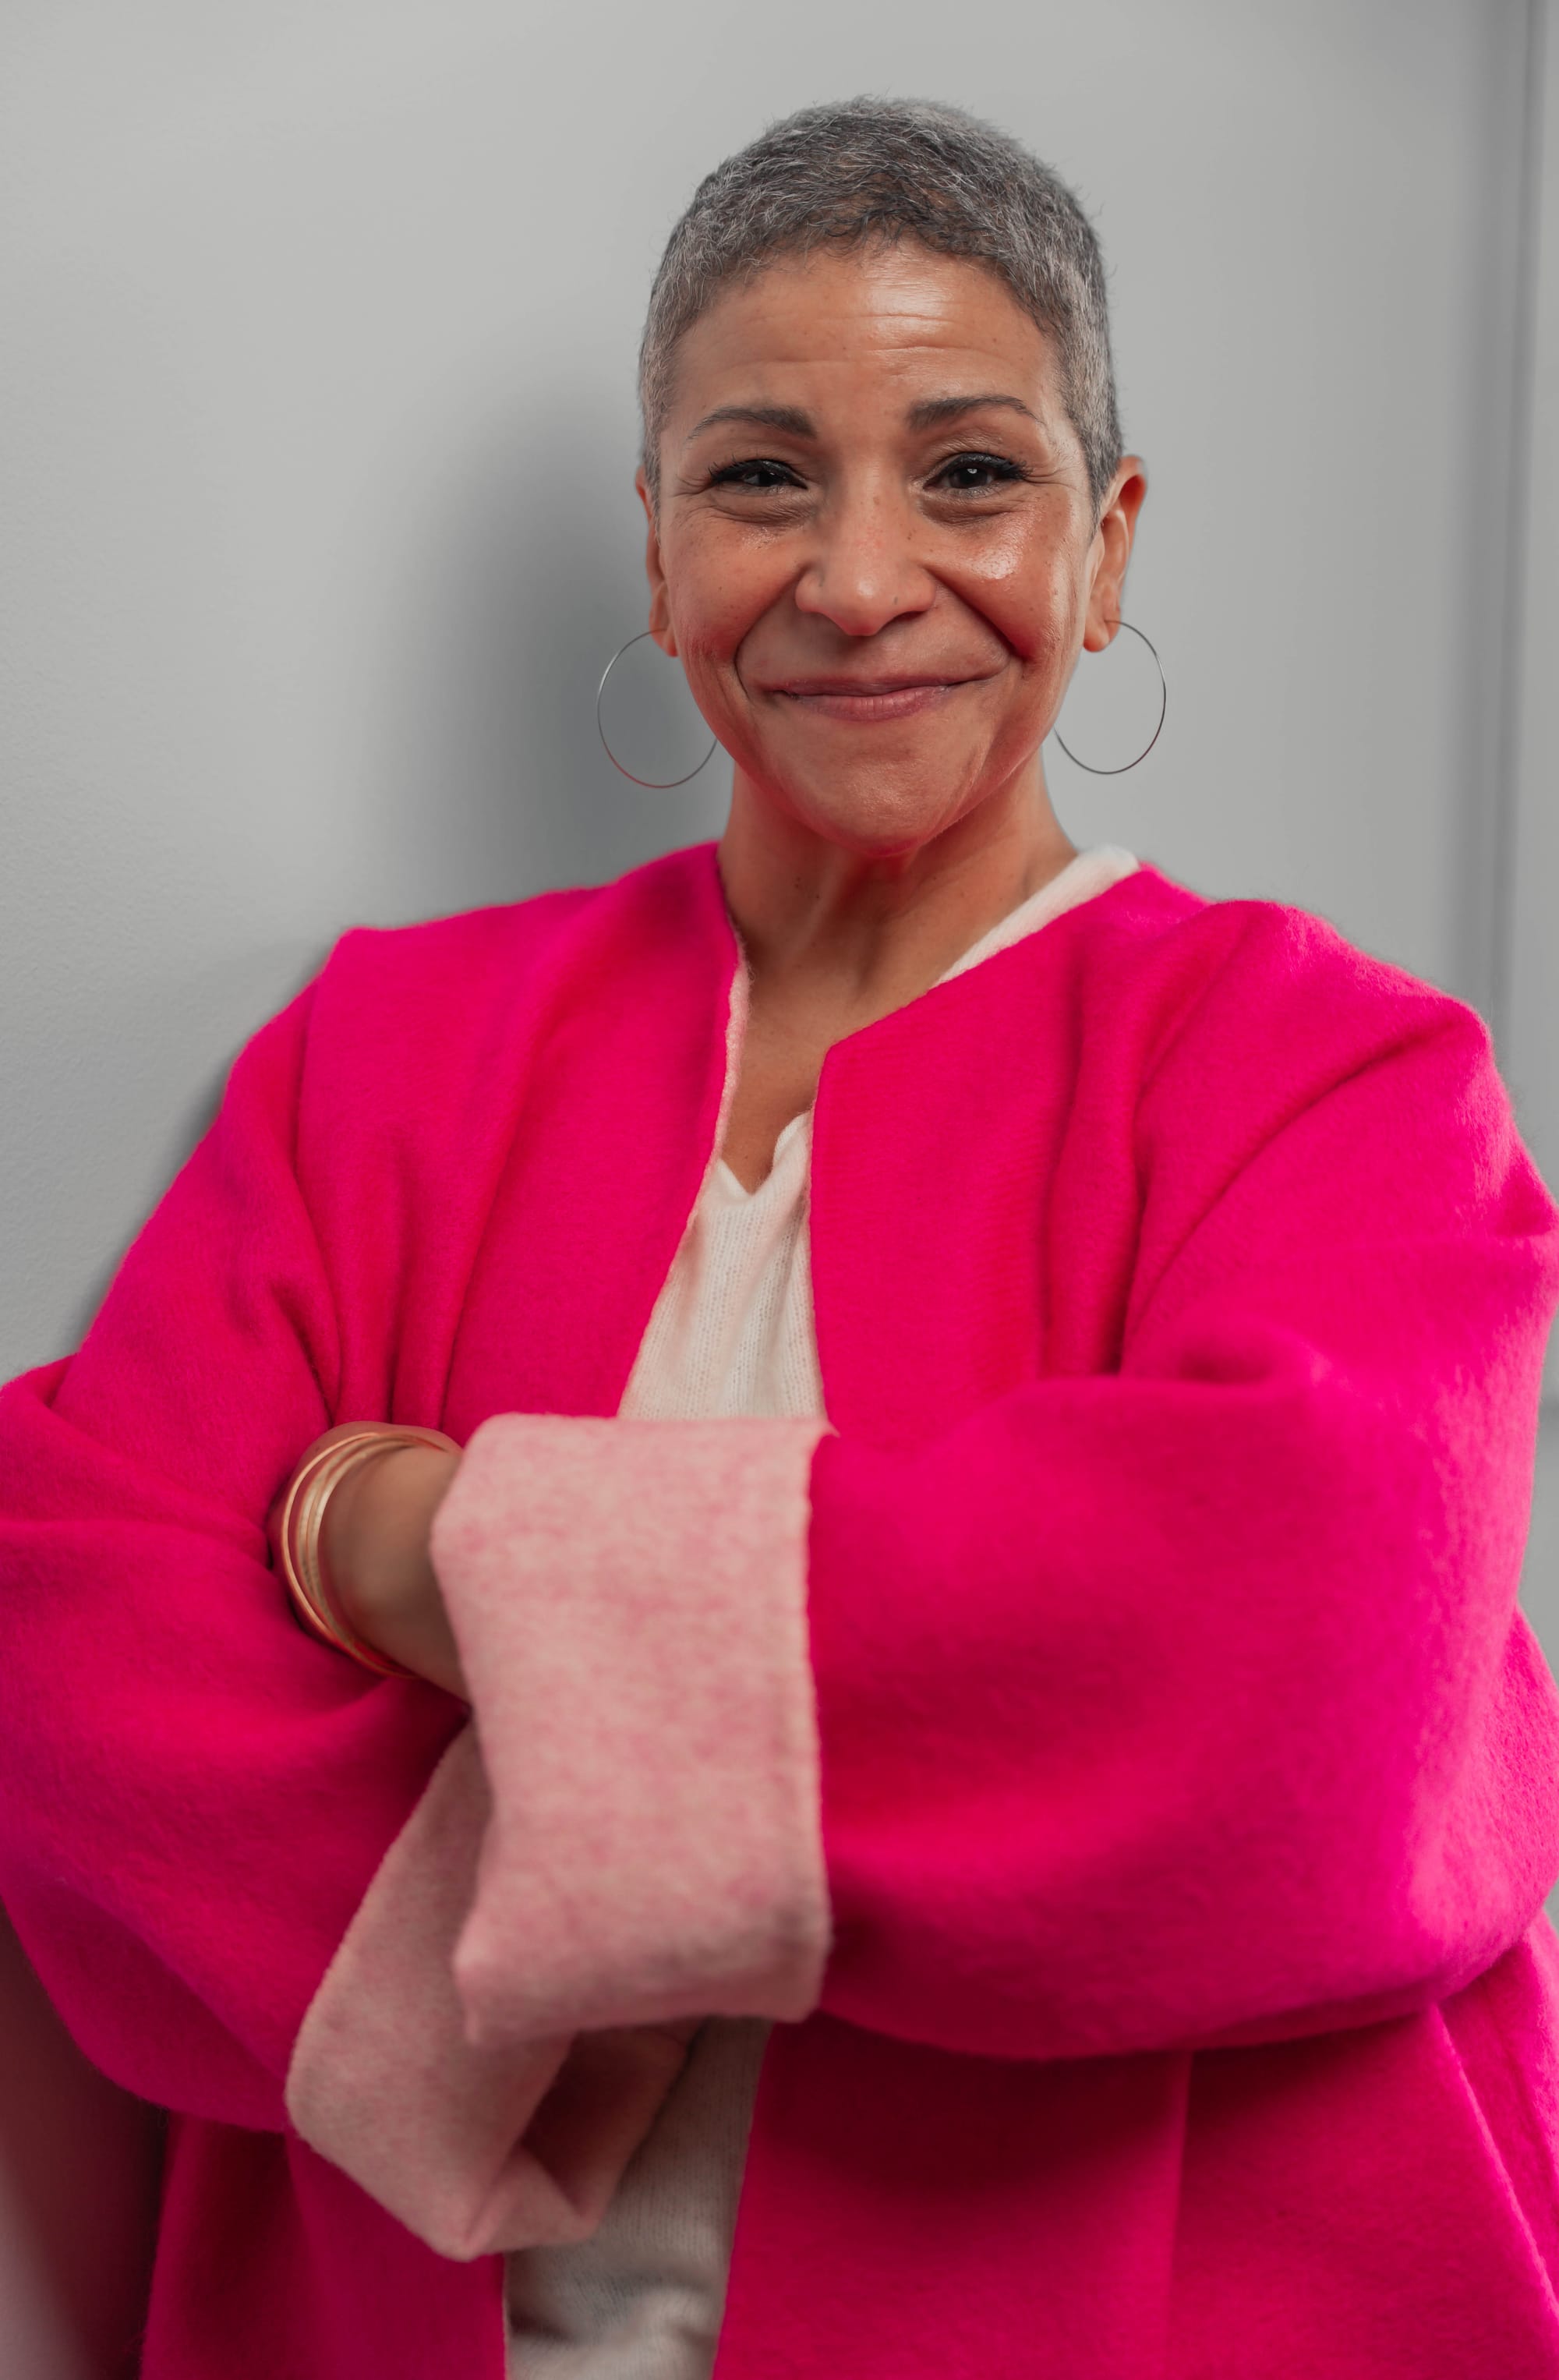 A smiling woman with short gray hair and silver hoop earrings wears a bright pink cardigan